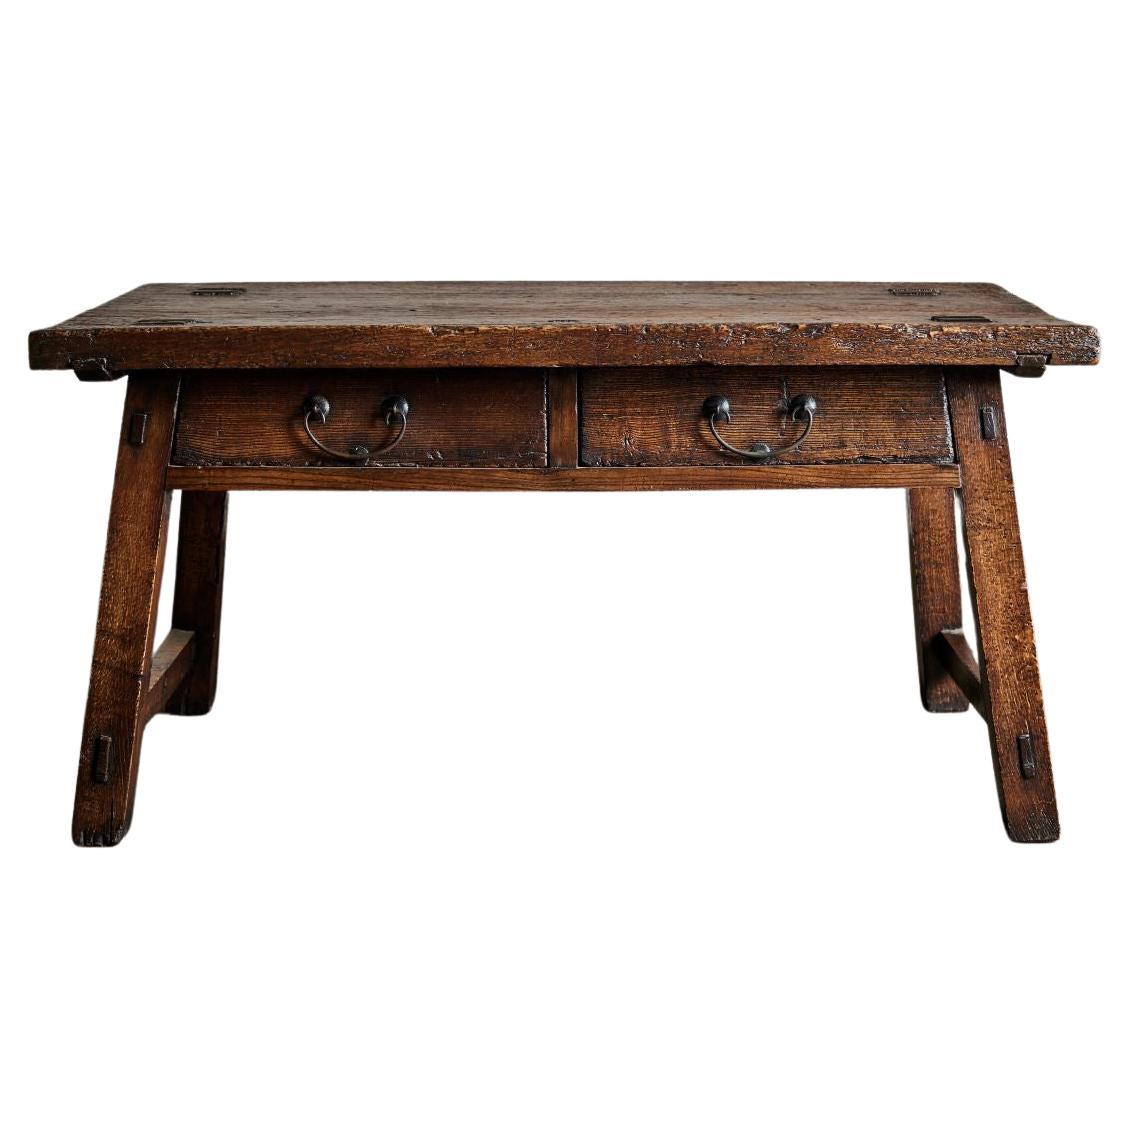 19th Century Splayed Leg Table For Sale